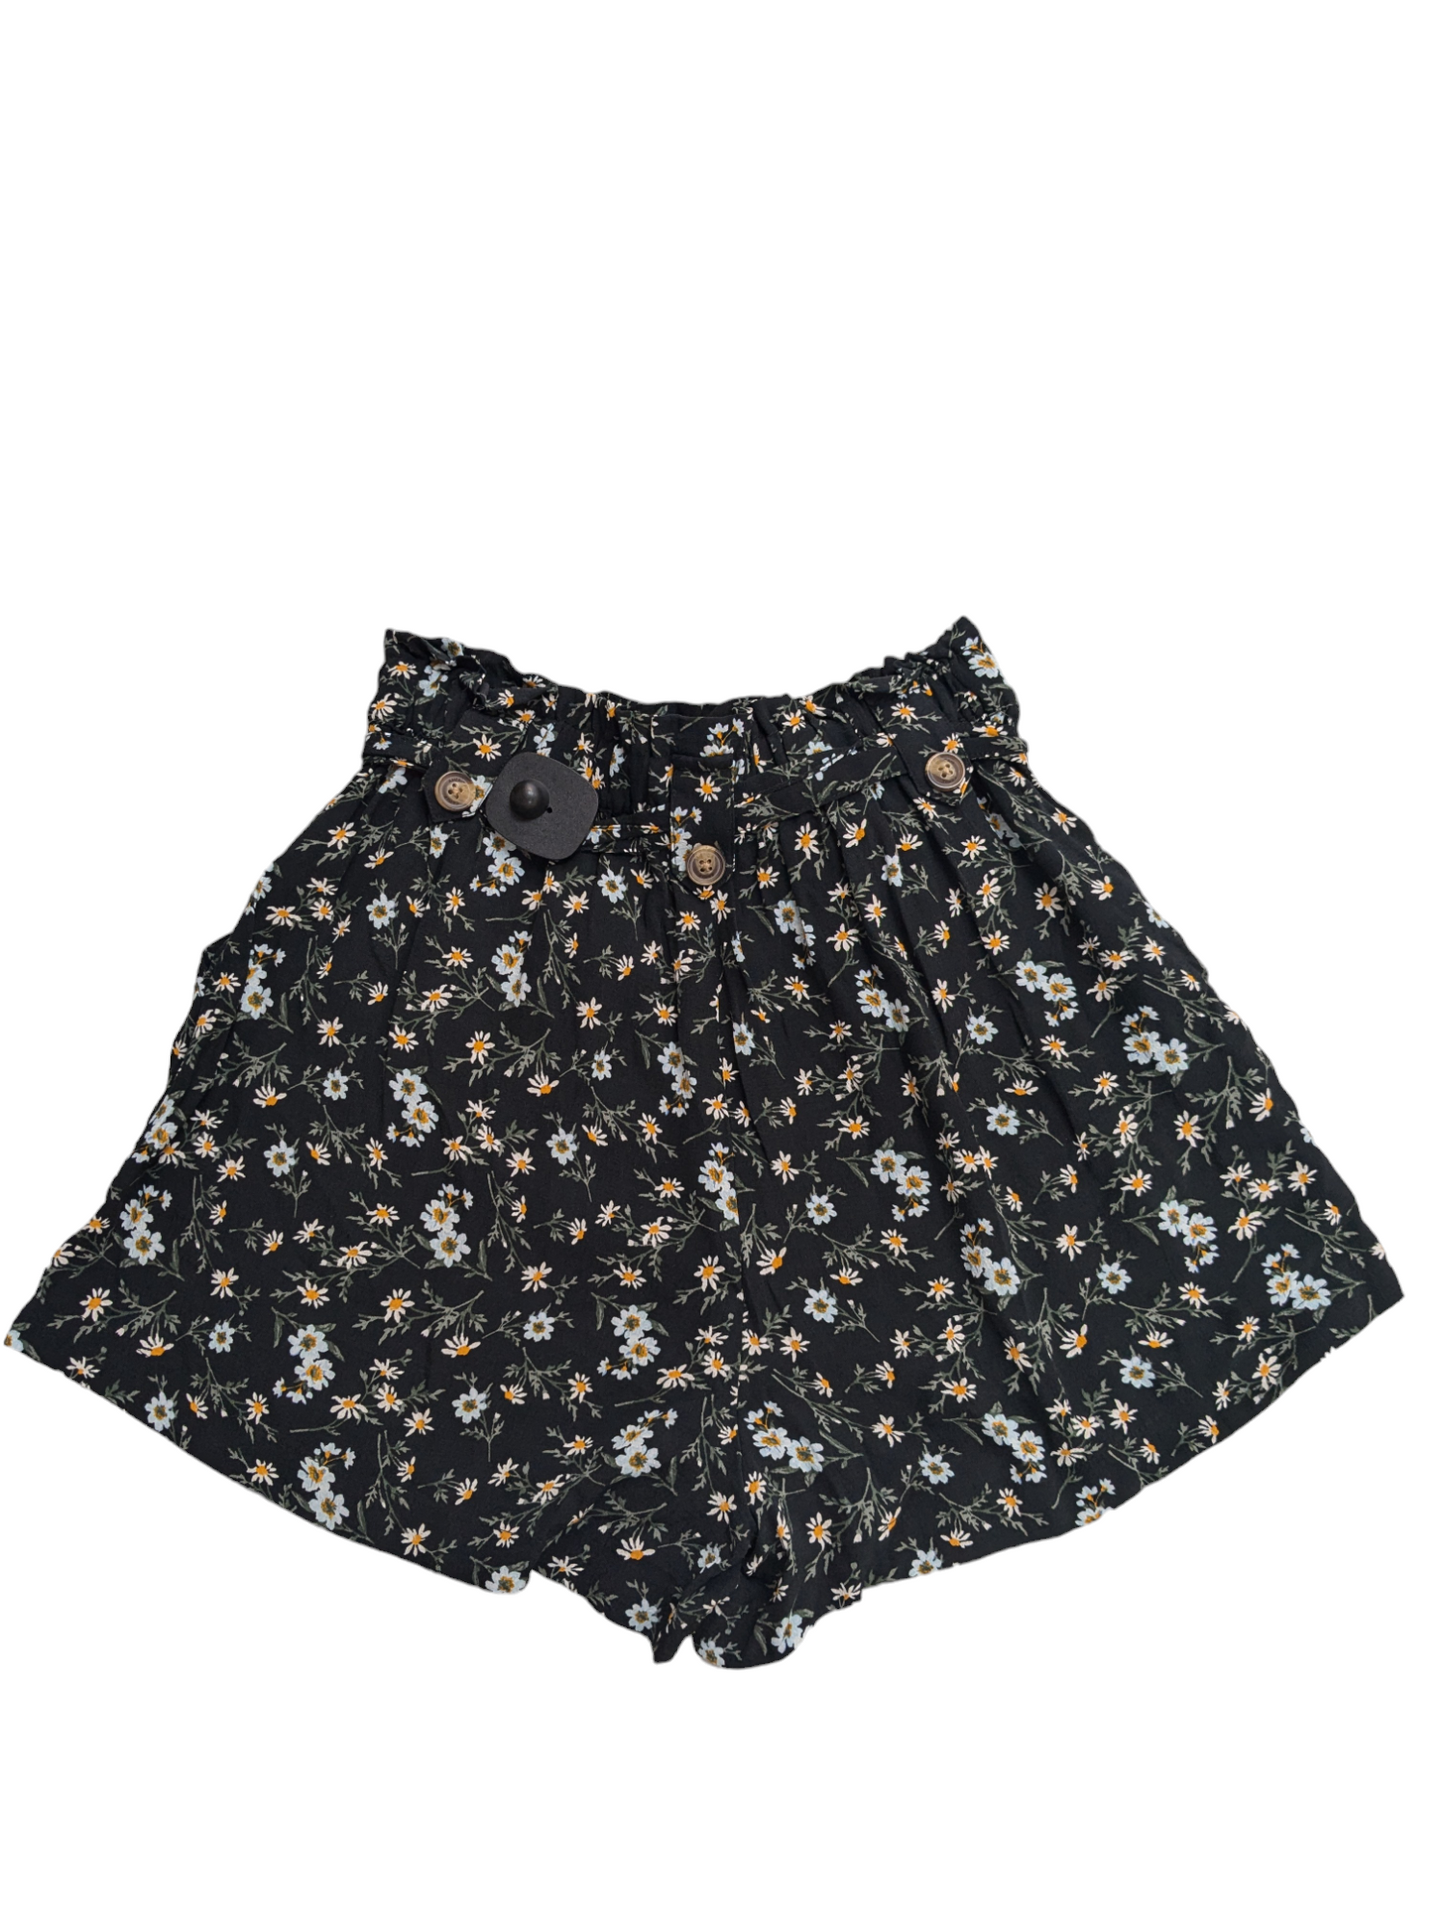 Floral Print Shorts American Eagle, Size S